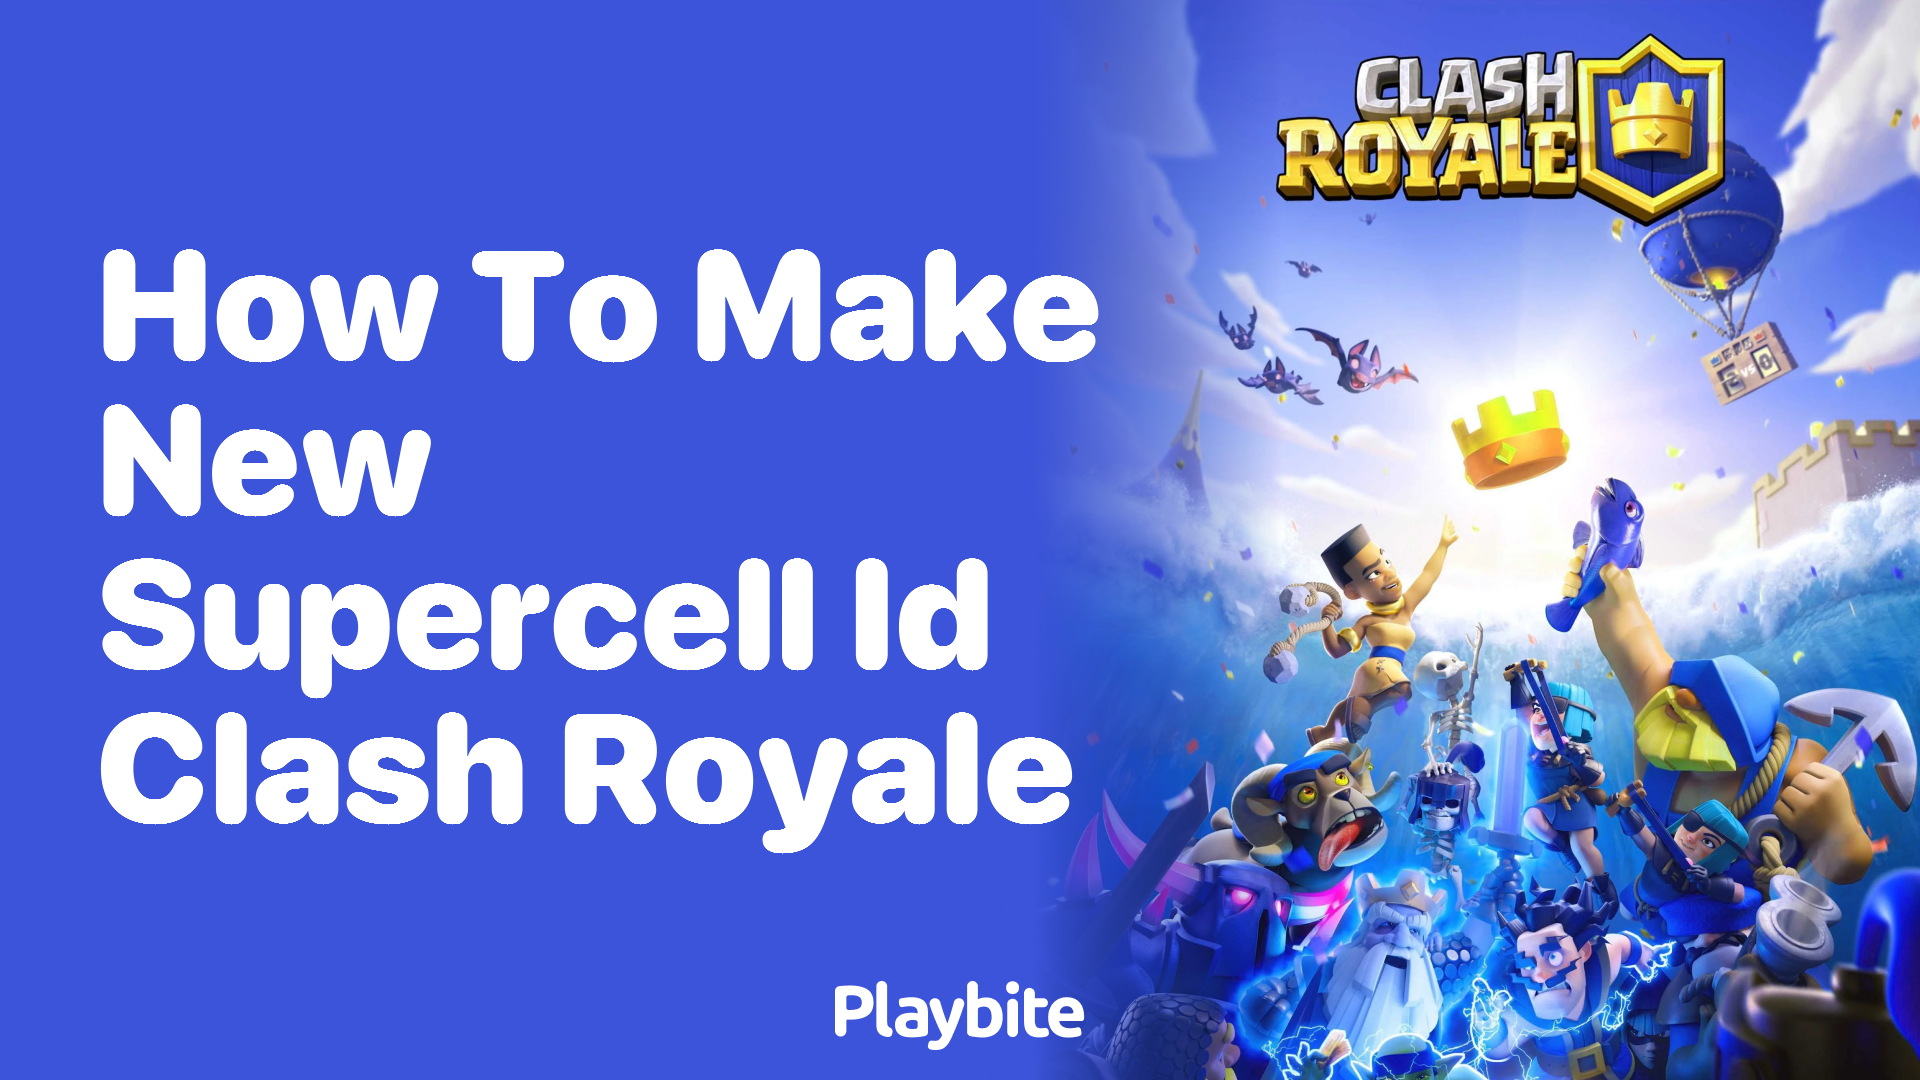 How to Make a New Supercell ID for Clash Royale